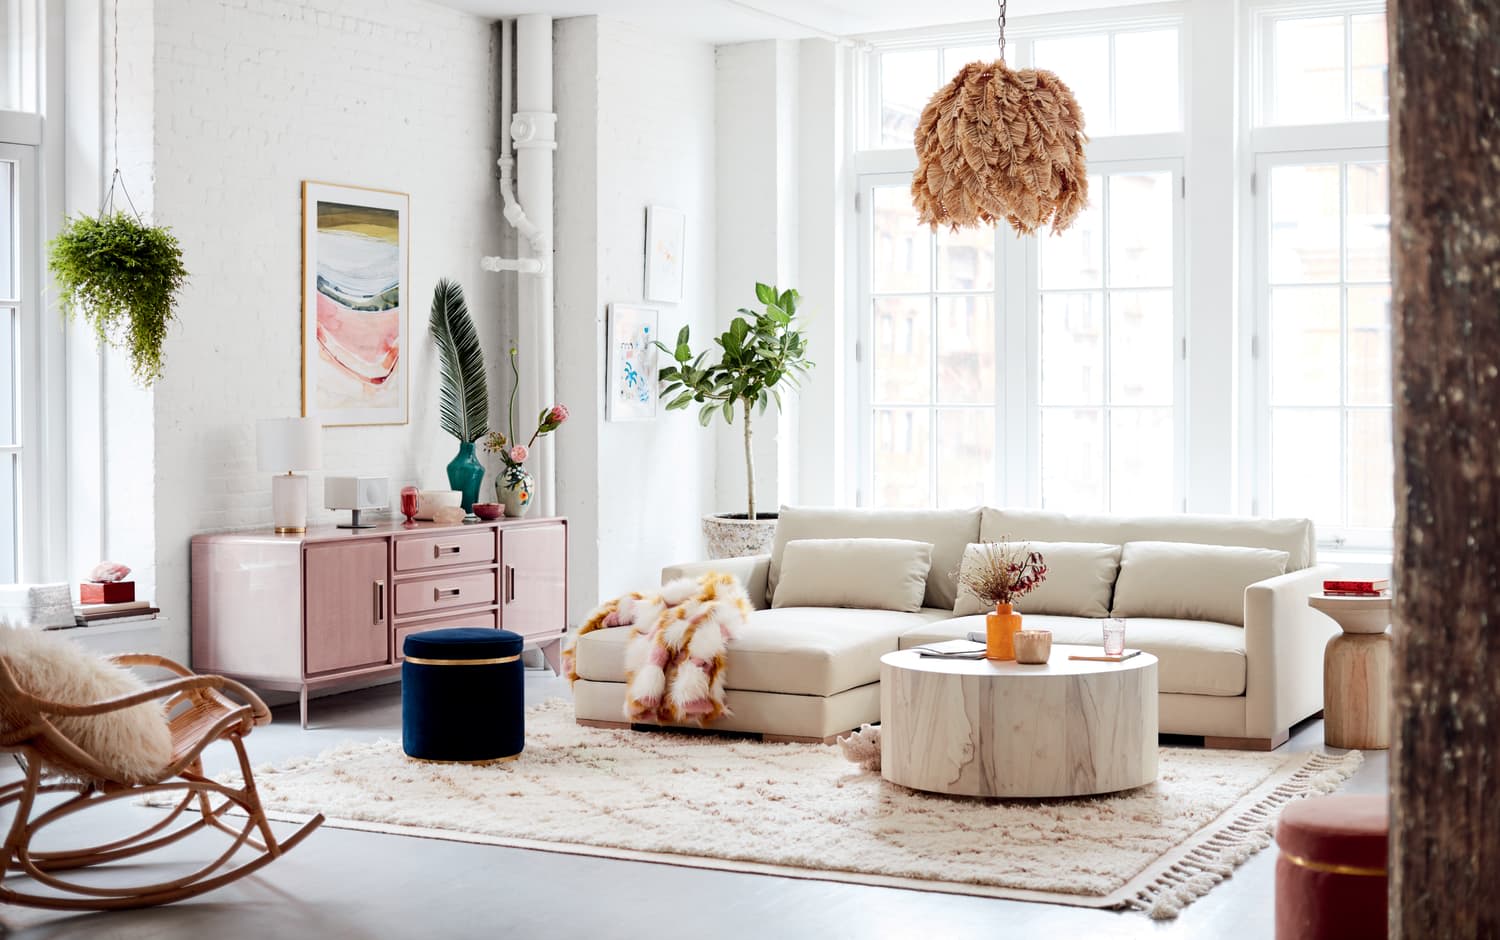 Walmart is Our New Favorite Source for Affordable Boho Decor and Furniture